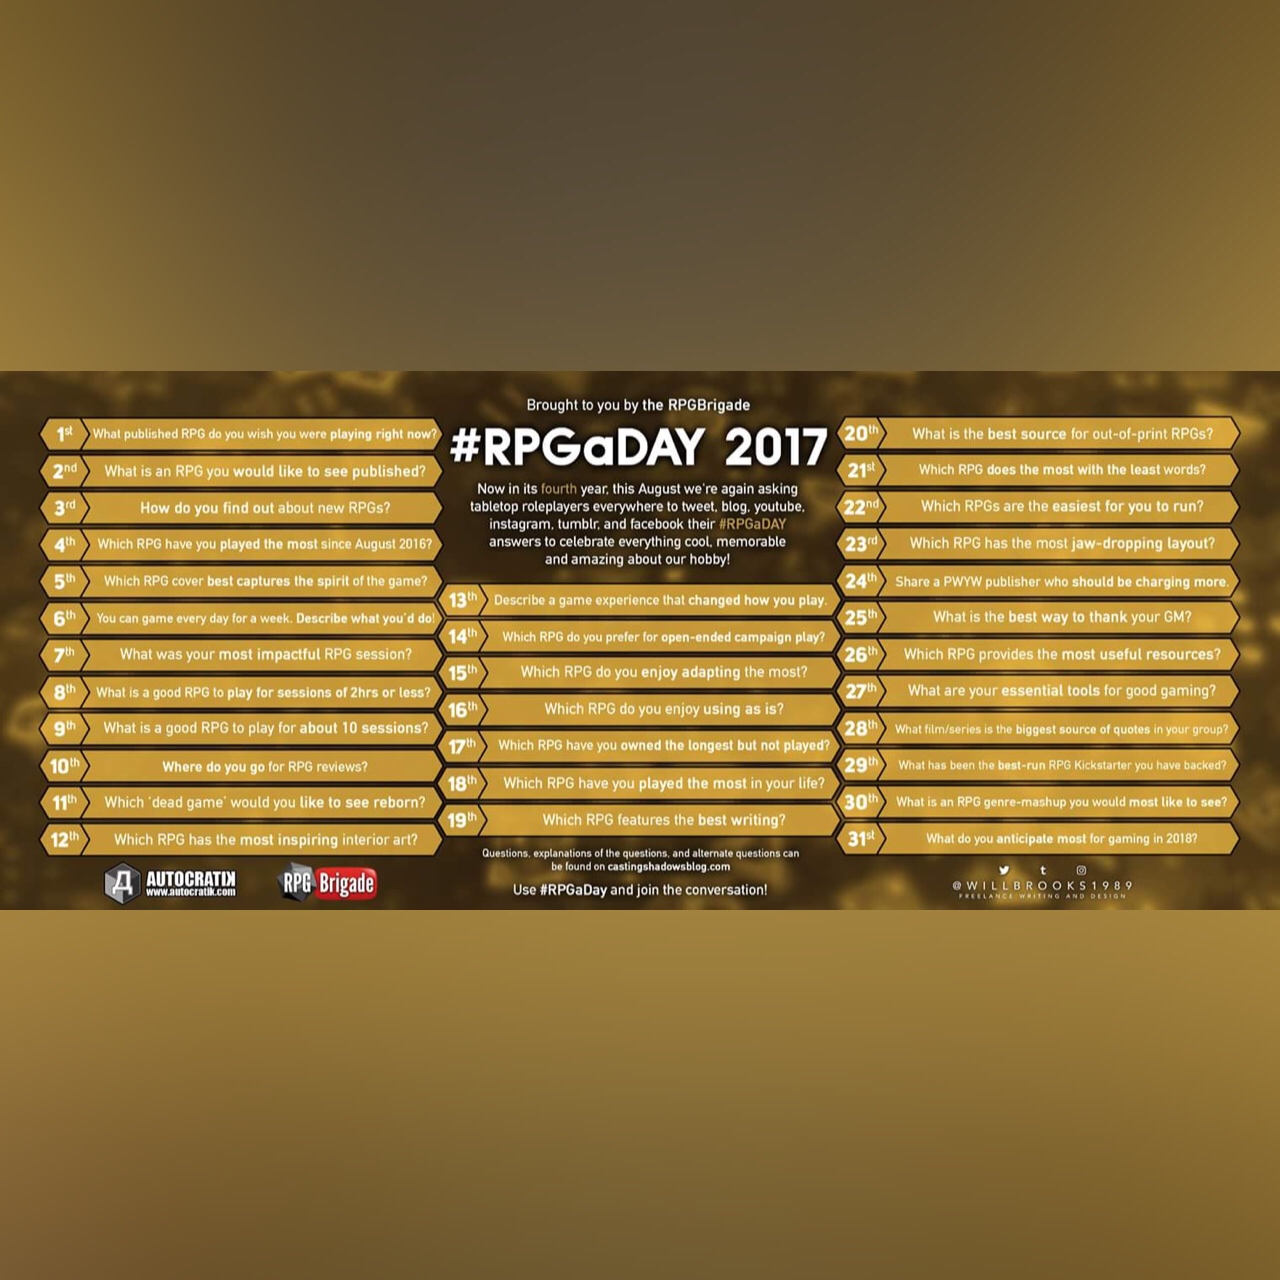 RPGaDAY 2017 August 14th Which RPG do you prefer for open-ended campaign play?